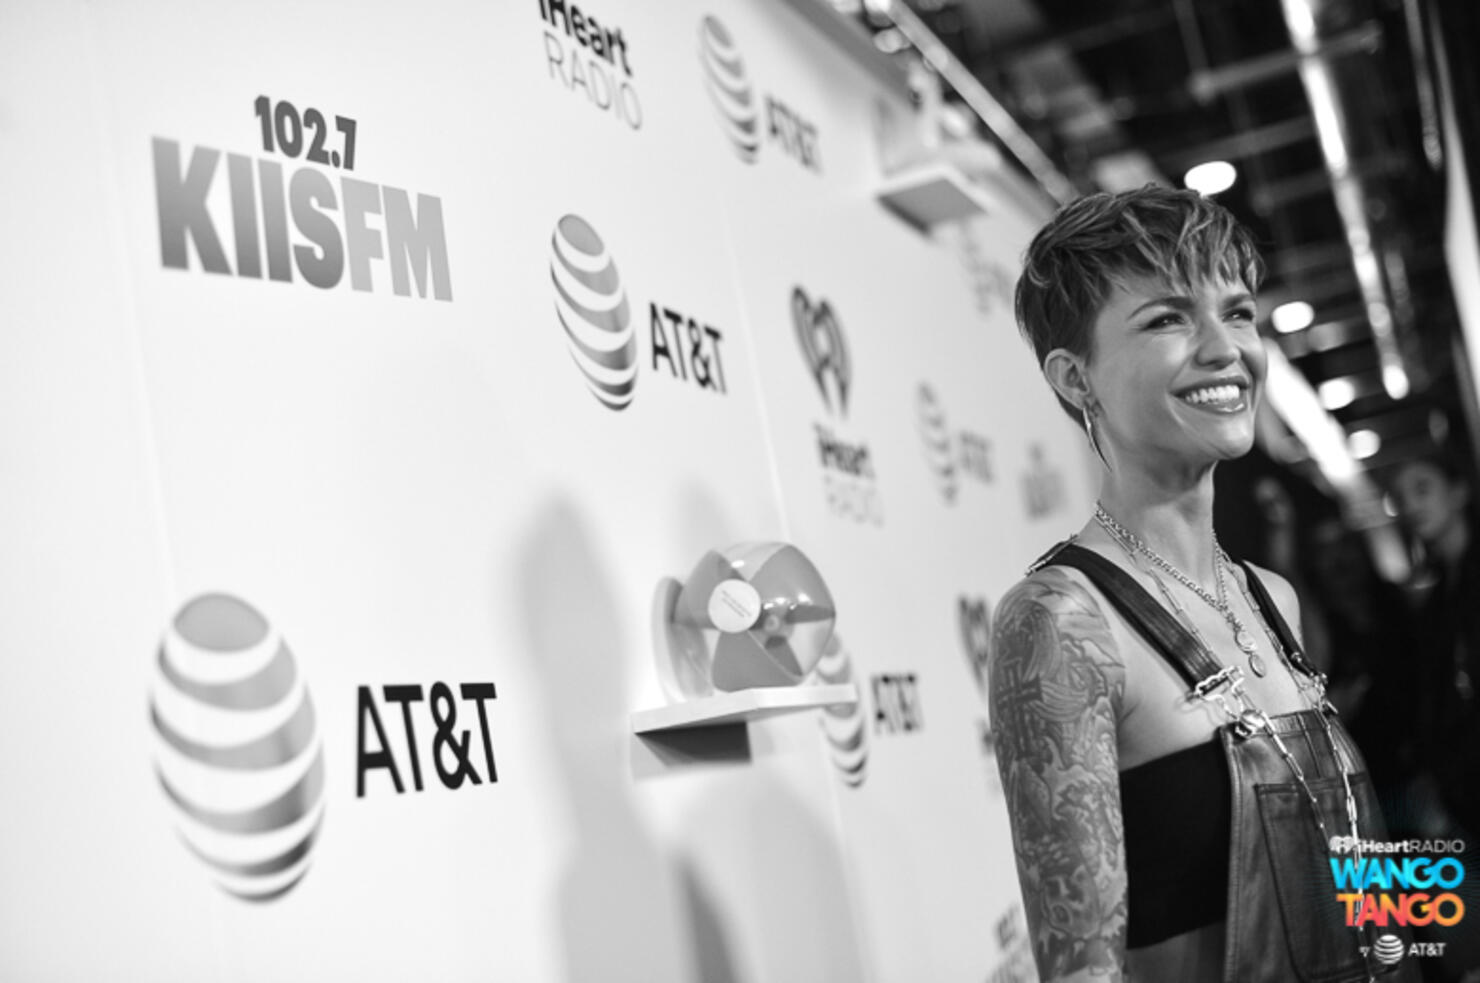  Ruby Rose arrives at the 2018 iHeartRadio Wango Tango by AT&T at Banc of California Stadium on June 2, 2018 in Los Angeles, California.